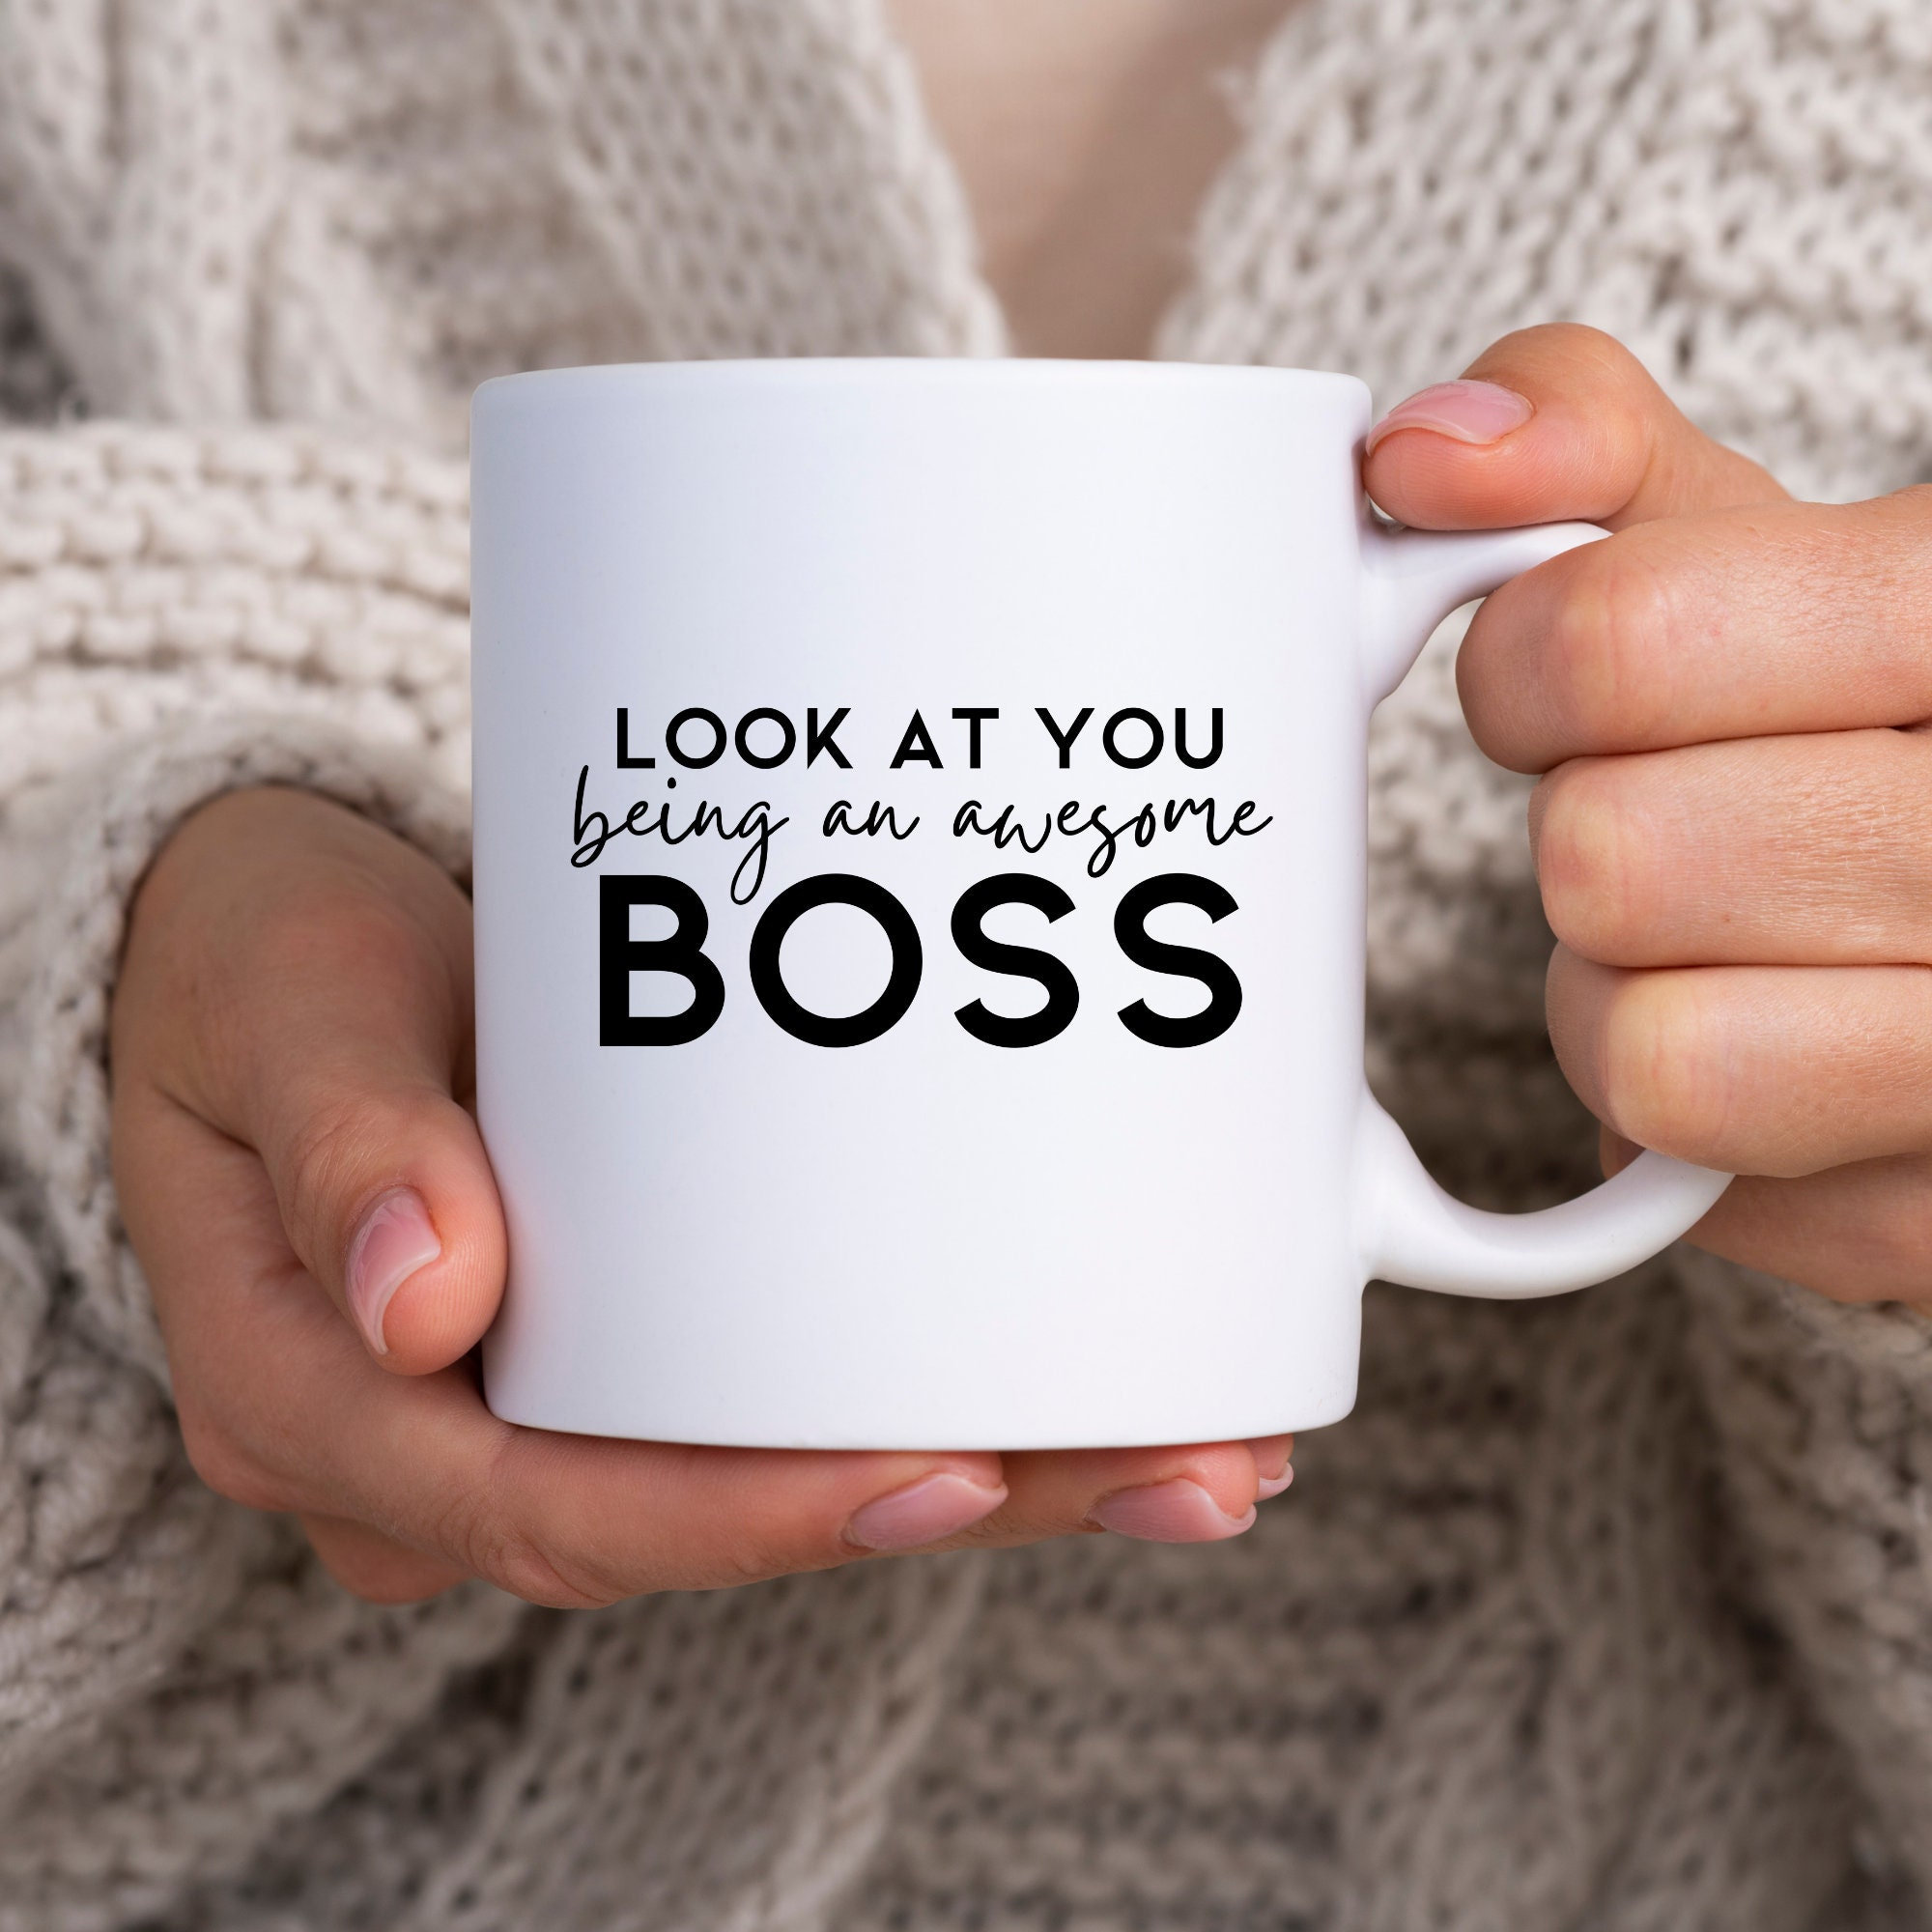 Funny Coffee Mug, I Never Asked To Be The World's Best Boss Mug, Boss Day  Gift Coffee Cup Present Idea for Women, Men, Boss, Male, Female, Coworkers,  Friend 